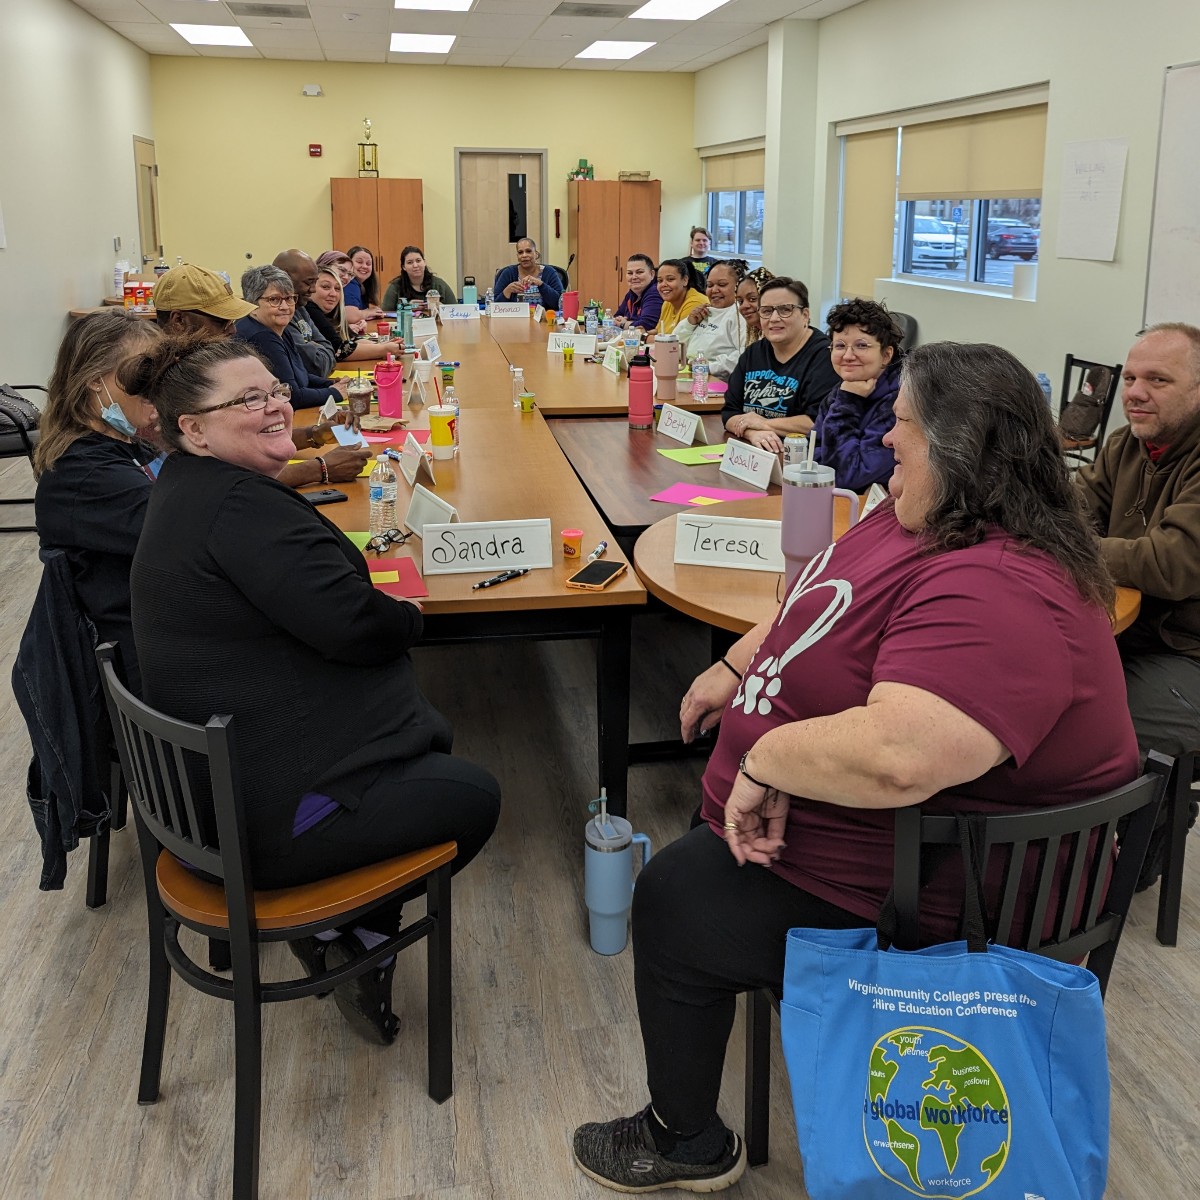 Our Foundational Services team recently completed their TherOps training at our Roanoke Program Offices. Equipped with this training, they are now prepared to fulfill the Commission on Accreditation of Rehabilitation Facilities (CARF) requirements and licensing. 🌟